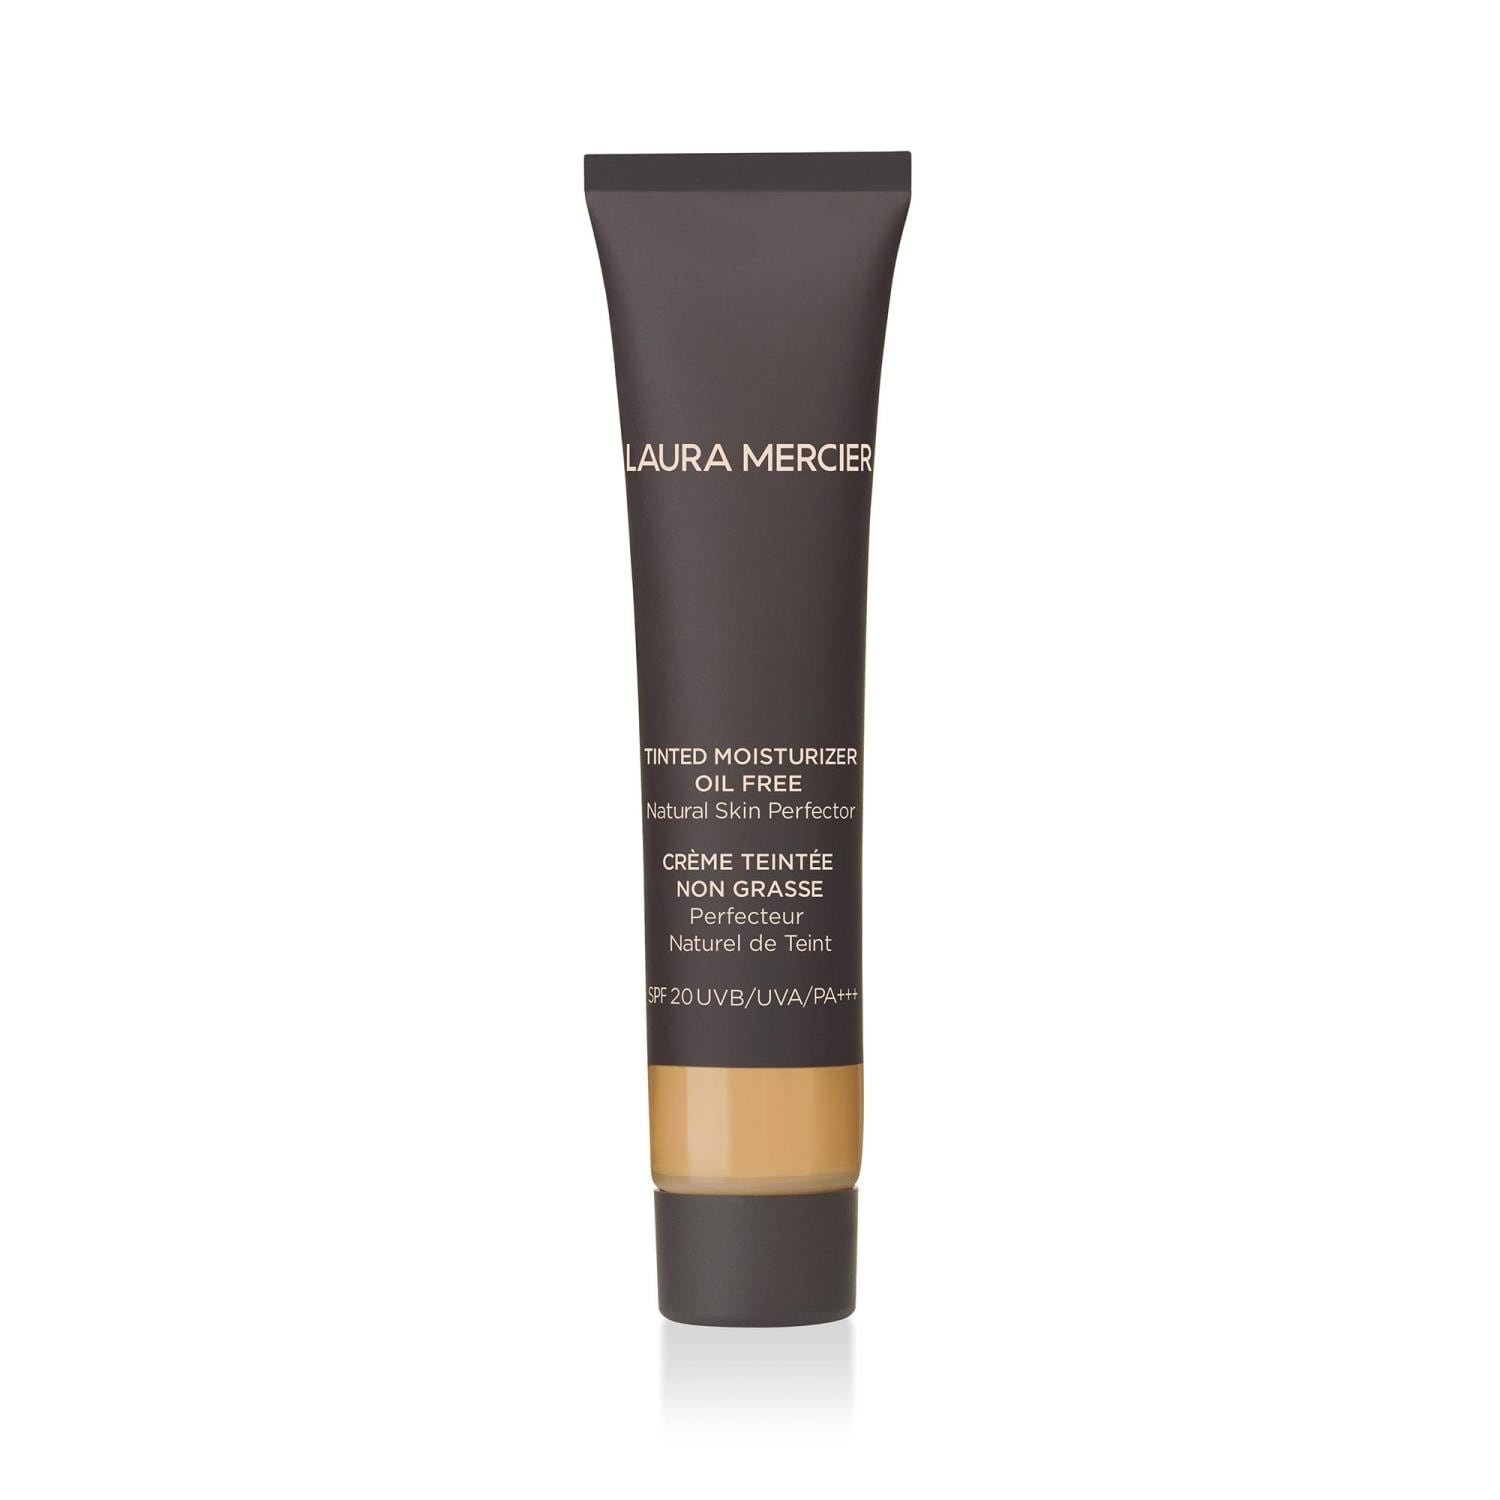 Laura Mercier Beauty To Go Tinted Moisturizer Oil Free Natural Skin Perfector SPF 20 - Travel Size, Nr. 3W1 - BISQUIT